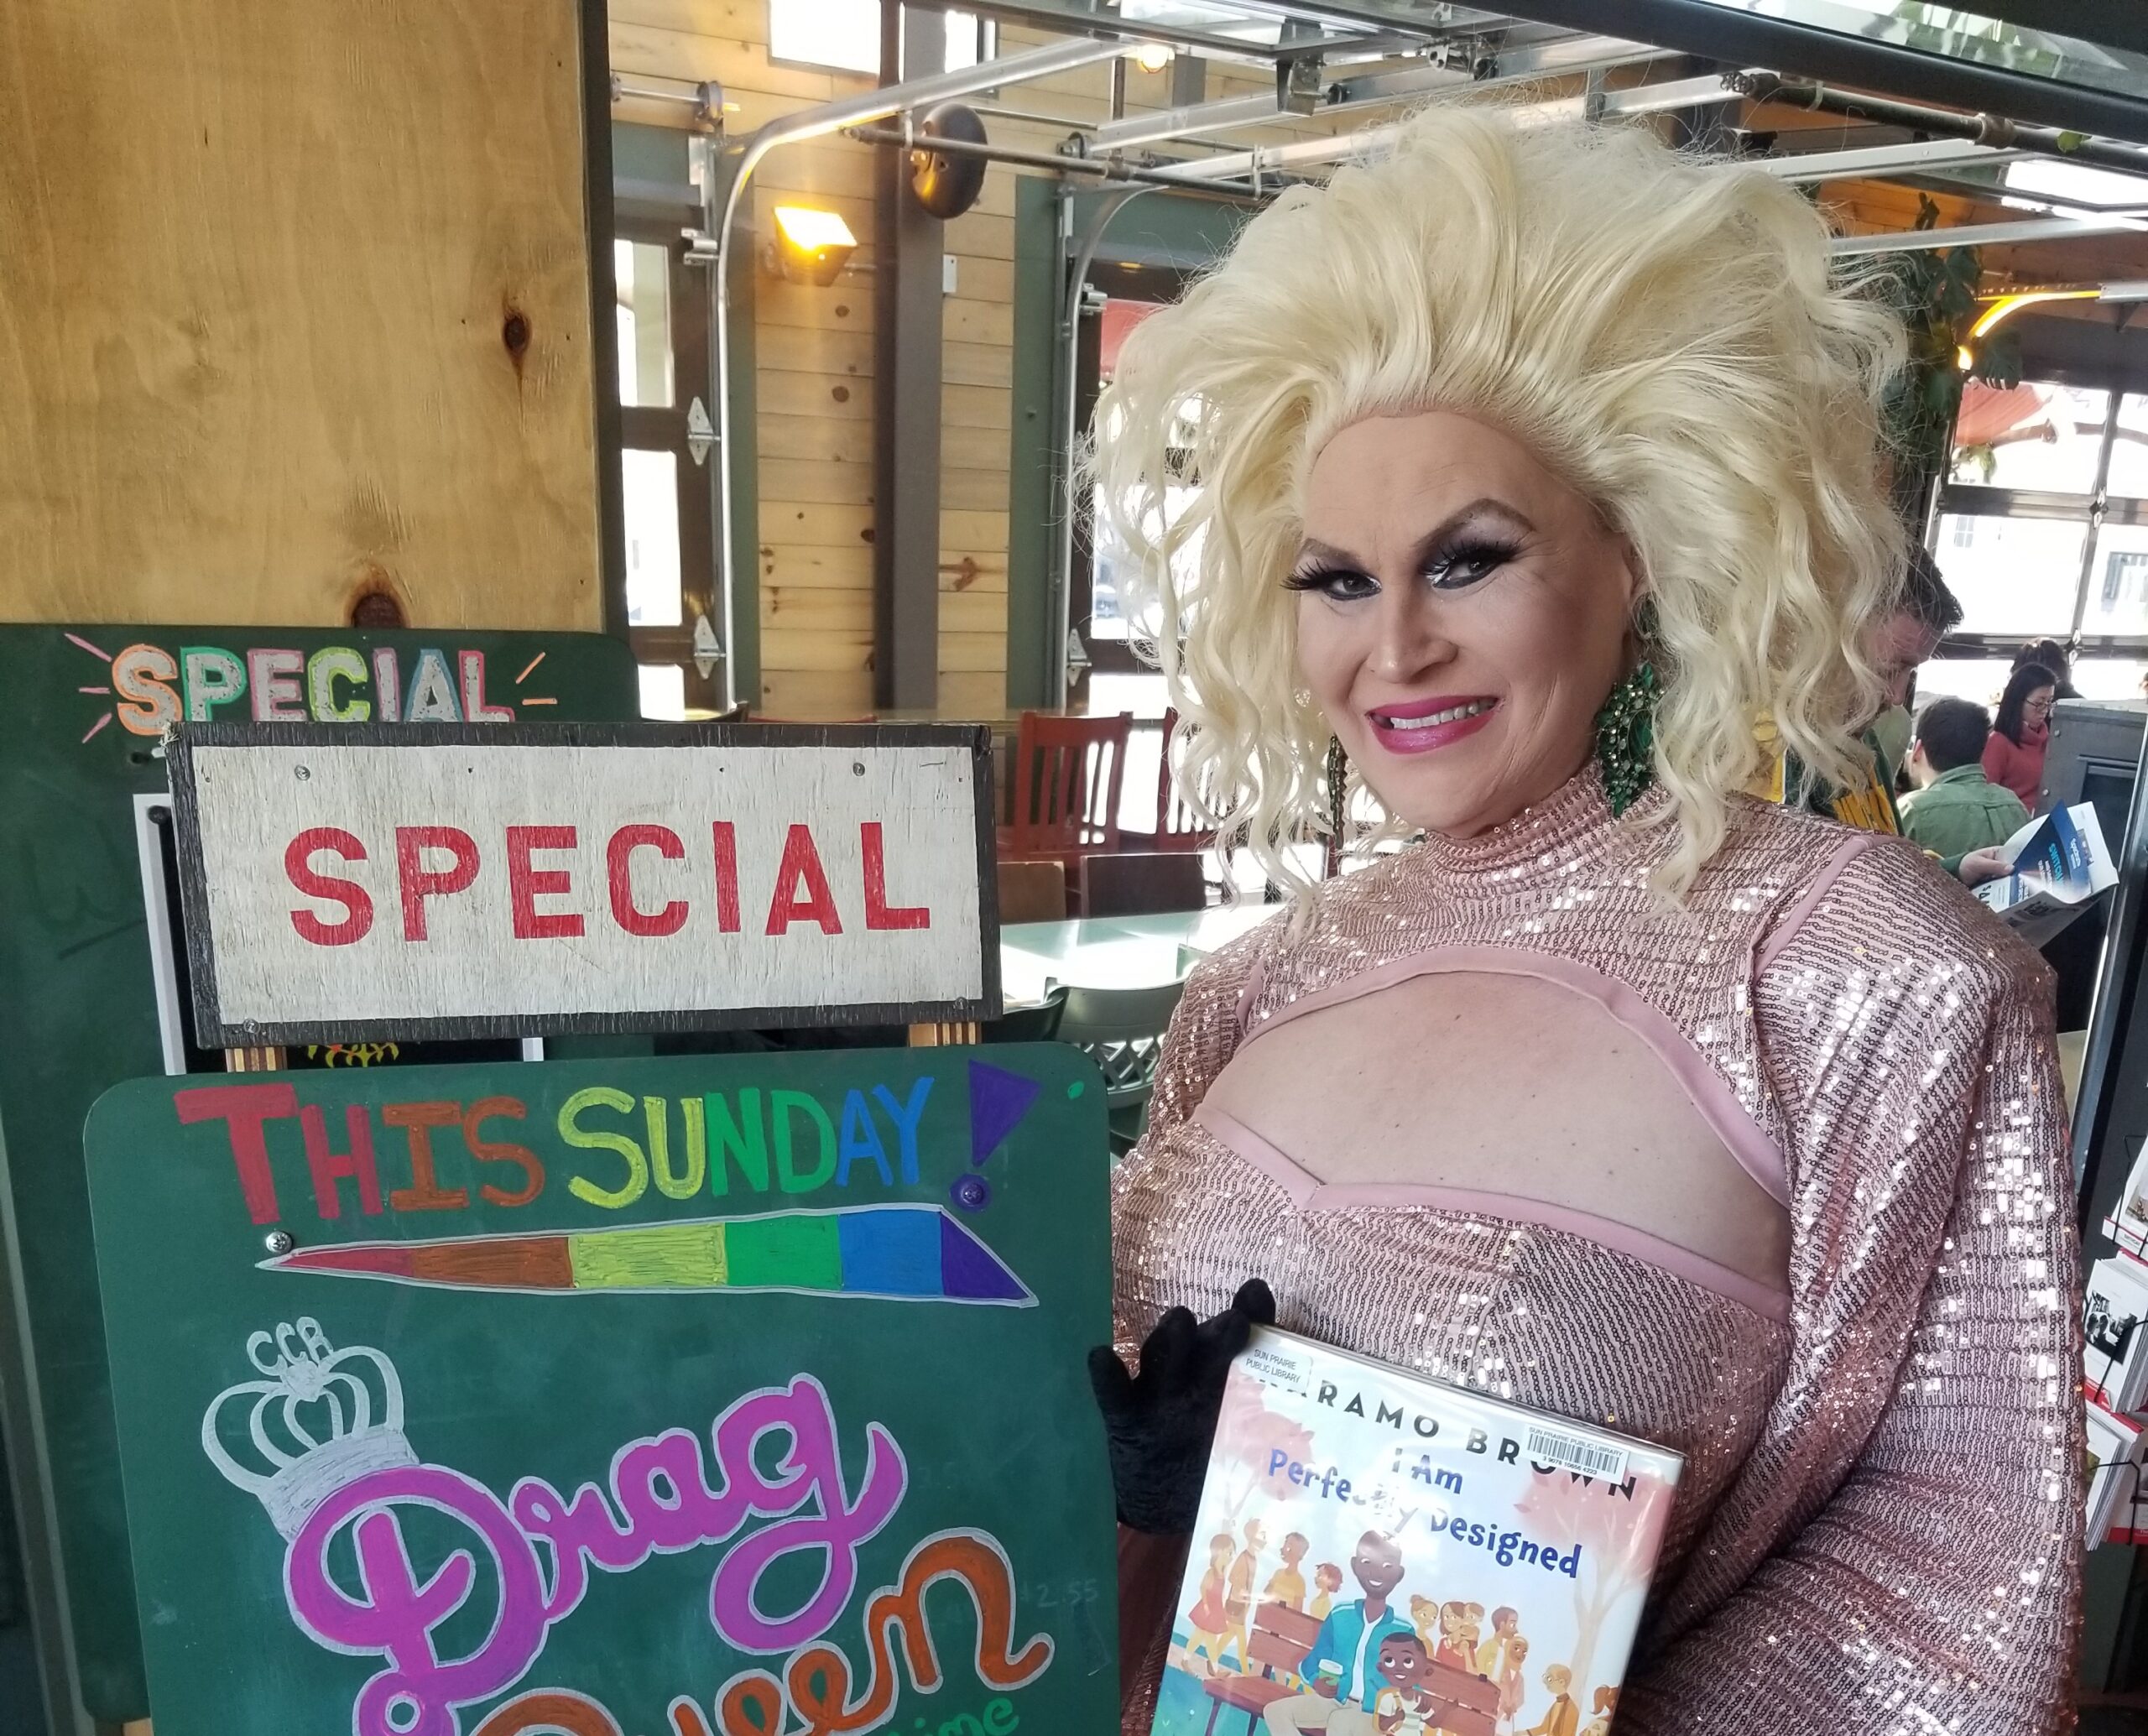 How Drag Queen Story Hour normalizes transgenderism